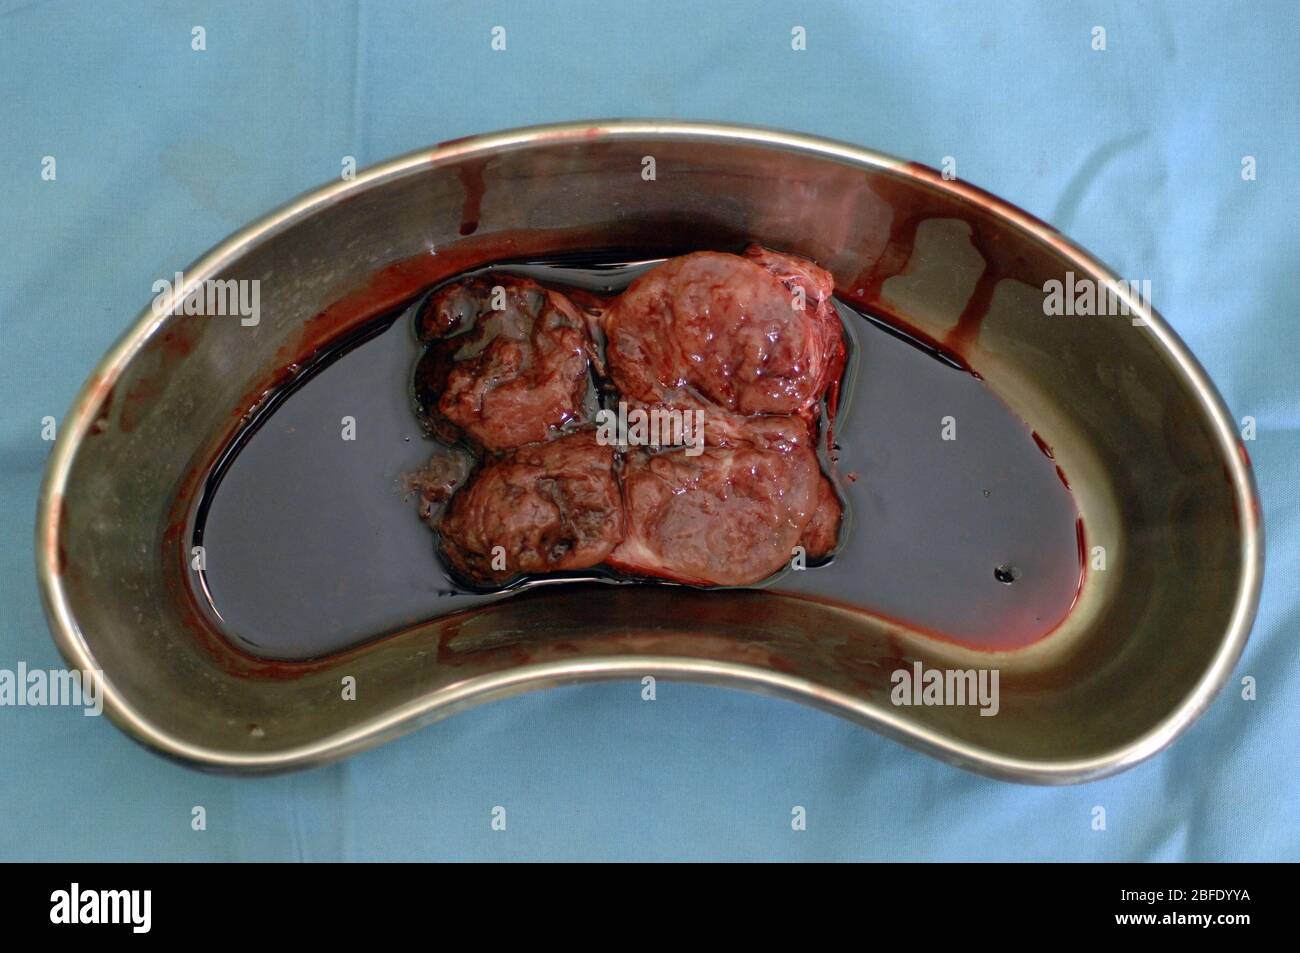 Close-up of an excised goitre (enlarged thyroid gland in a silver kidney dish). Stock Photo